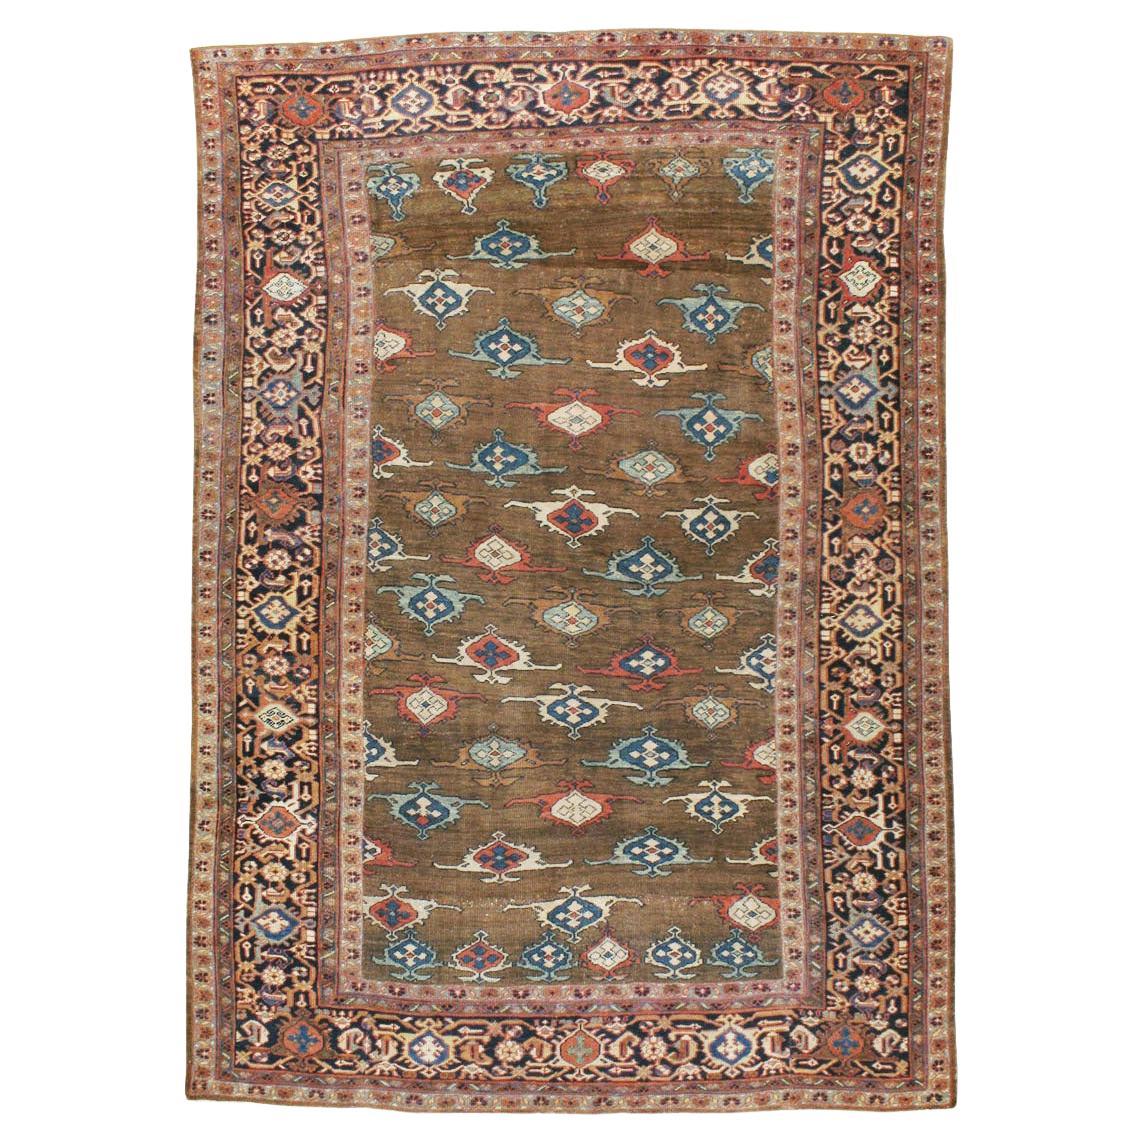 Early 20th Century Handmade Persian Mahal Room Size Carpet For Sale